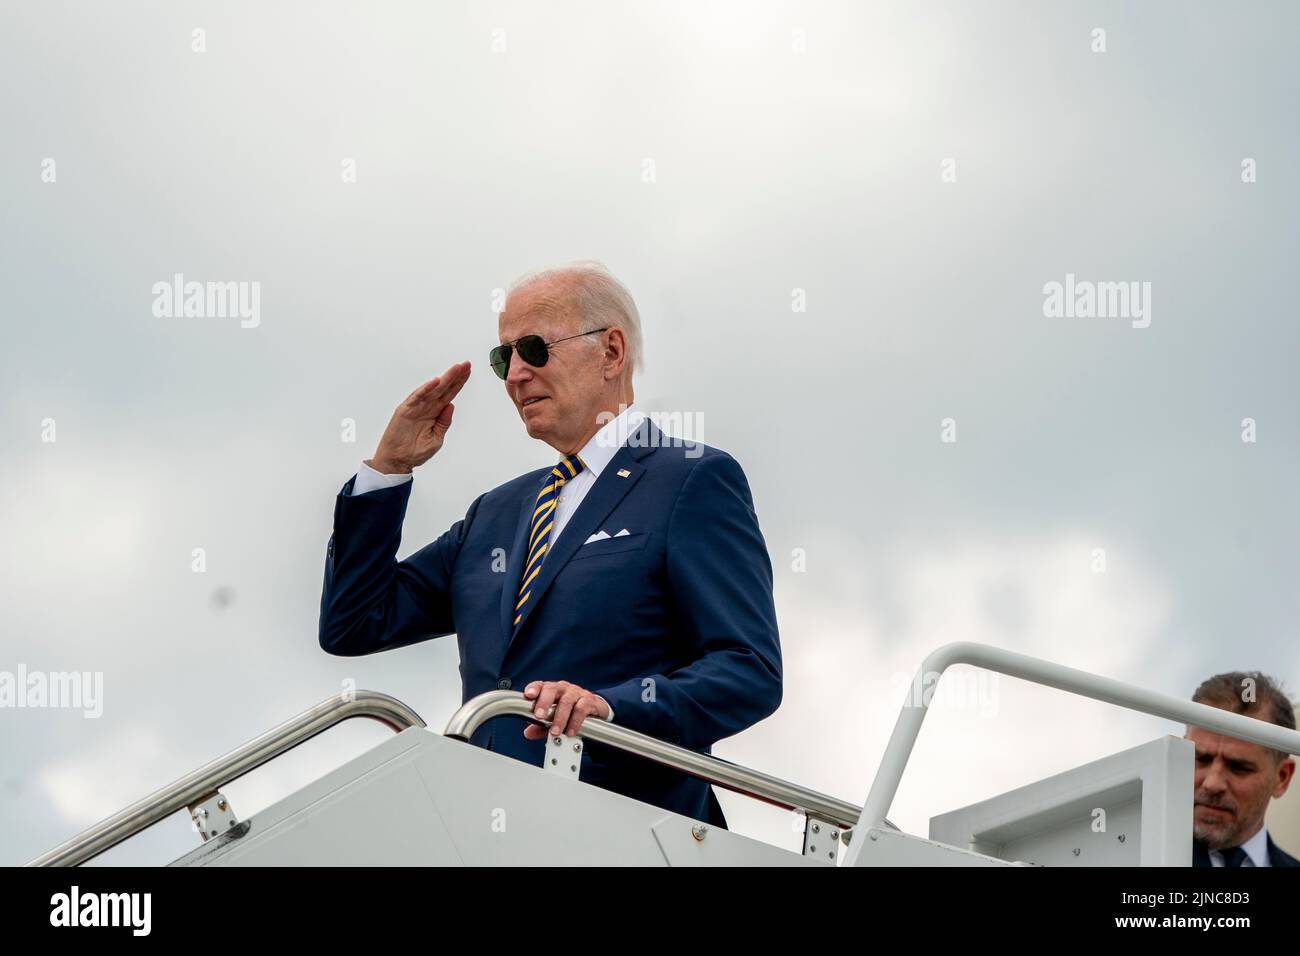 United States President Joe Biden salutes as he boards Air Force One at Joint Base Andrews, Maryland, USA, 10 August 2022.Credit: Shawn Thew/Pool via CNP /MediaPunch Stock Photo